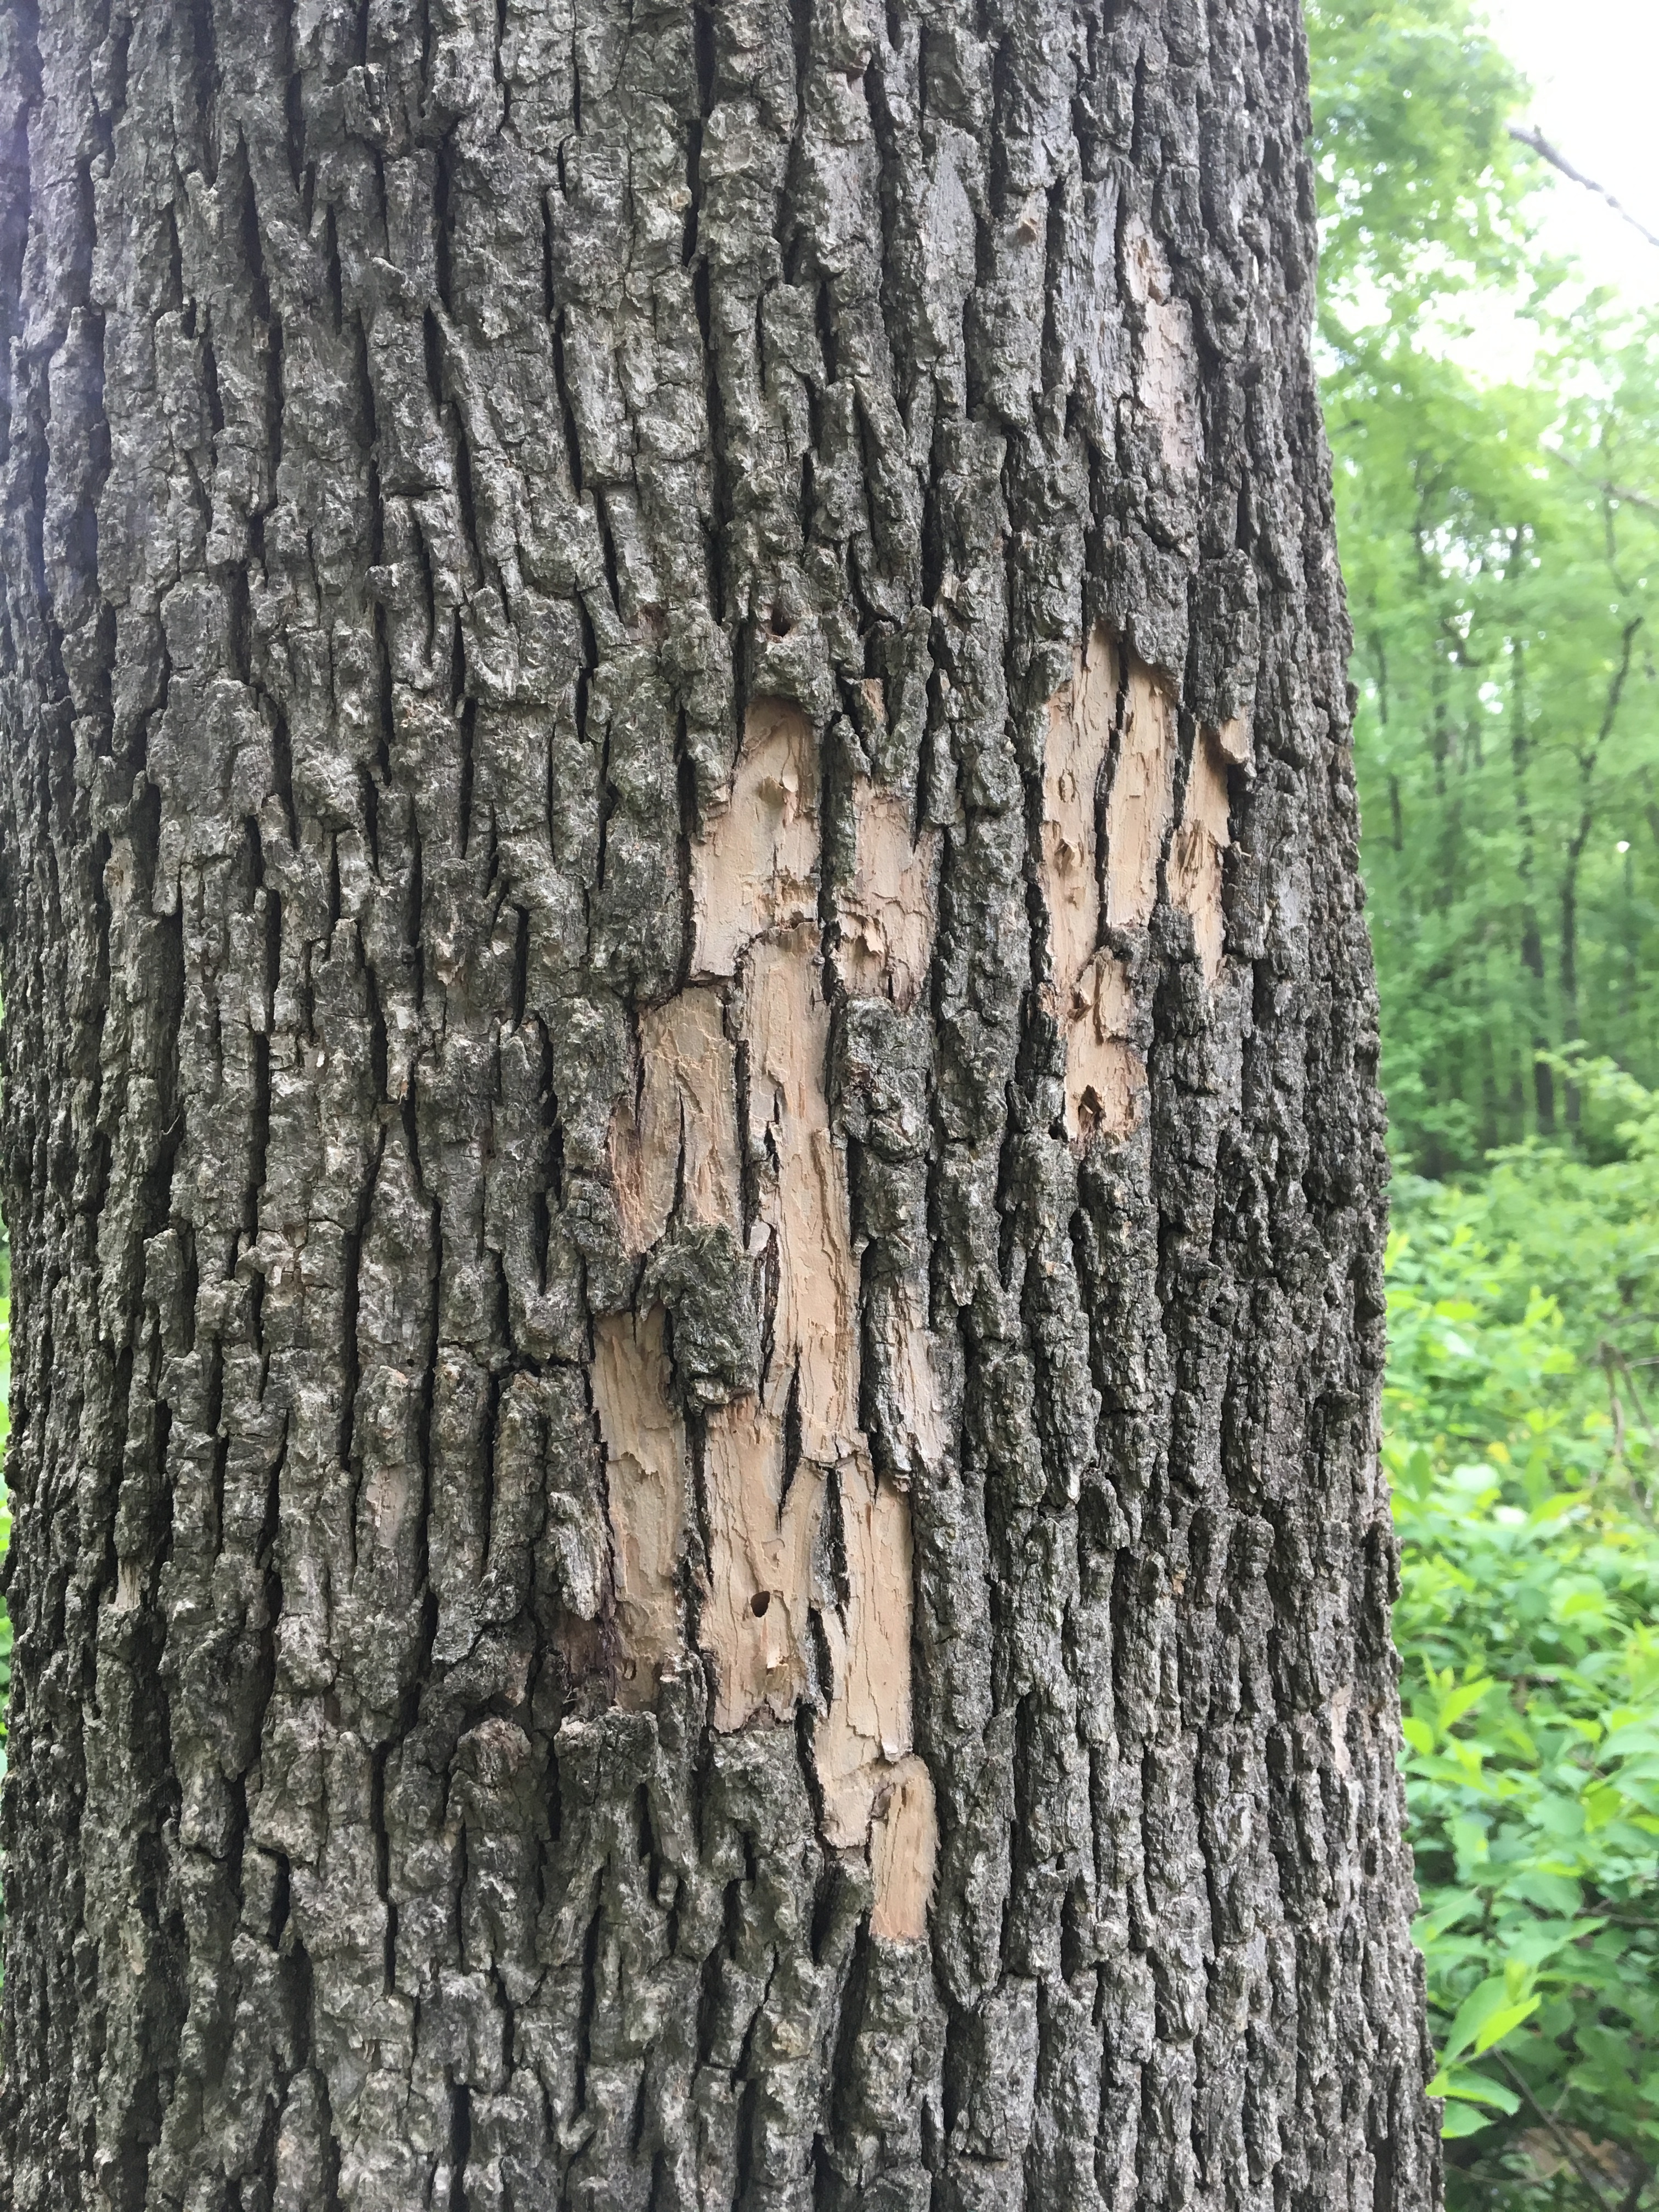 Bark falling off, trees dying - Ask an Expert